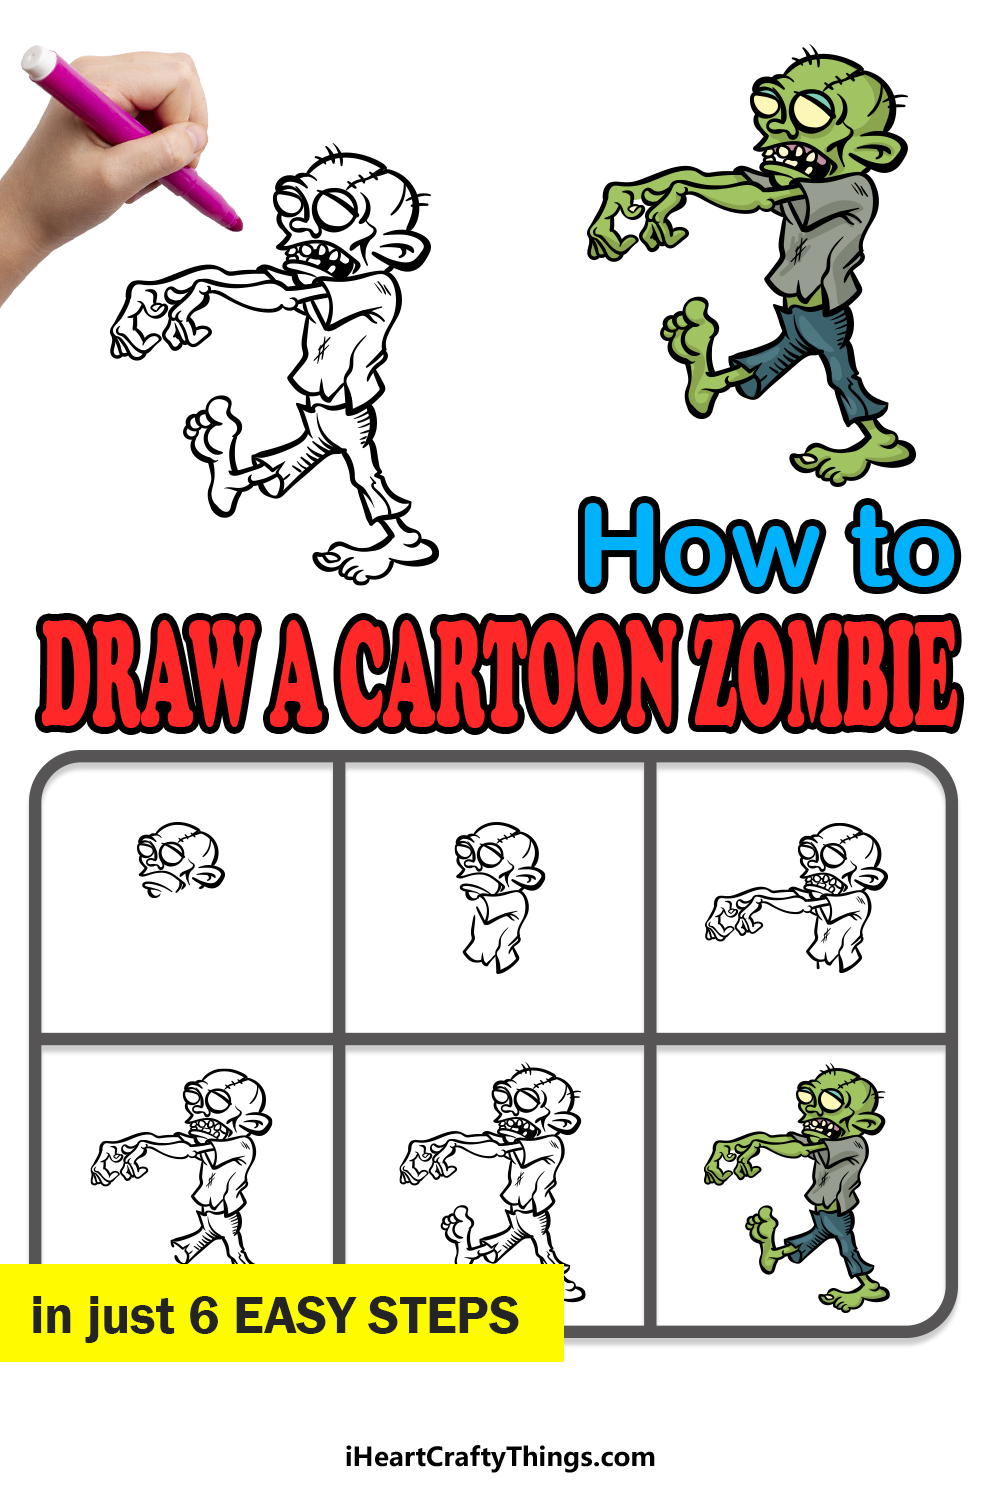 how to draw a cartoon zombie in 6 easy steps